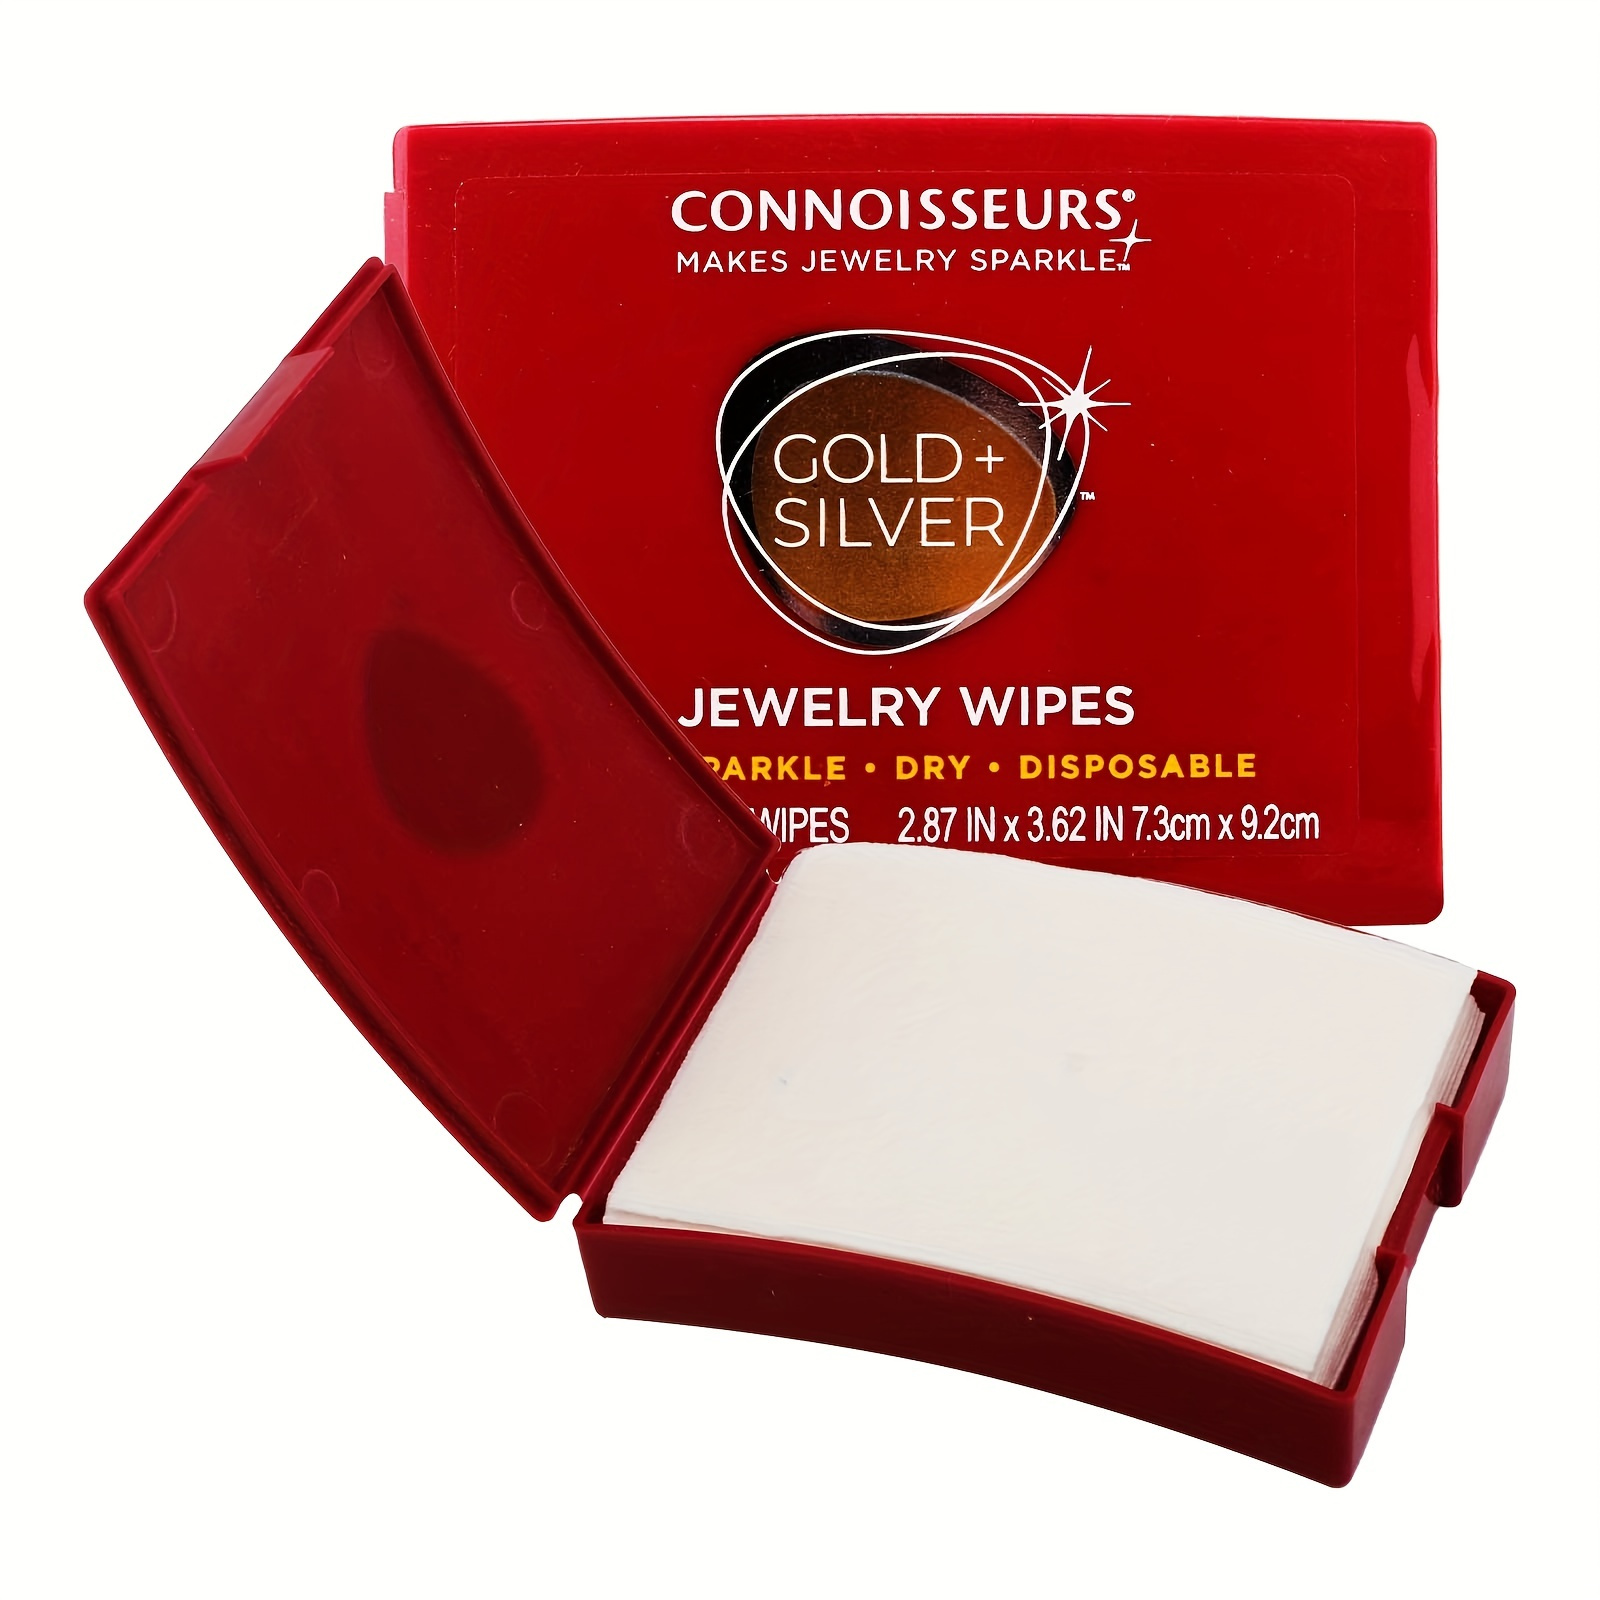 Review: These Jewelry Wipes Made My Pieces Sparkle Like New